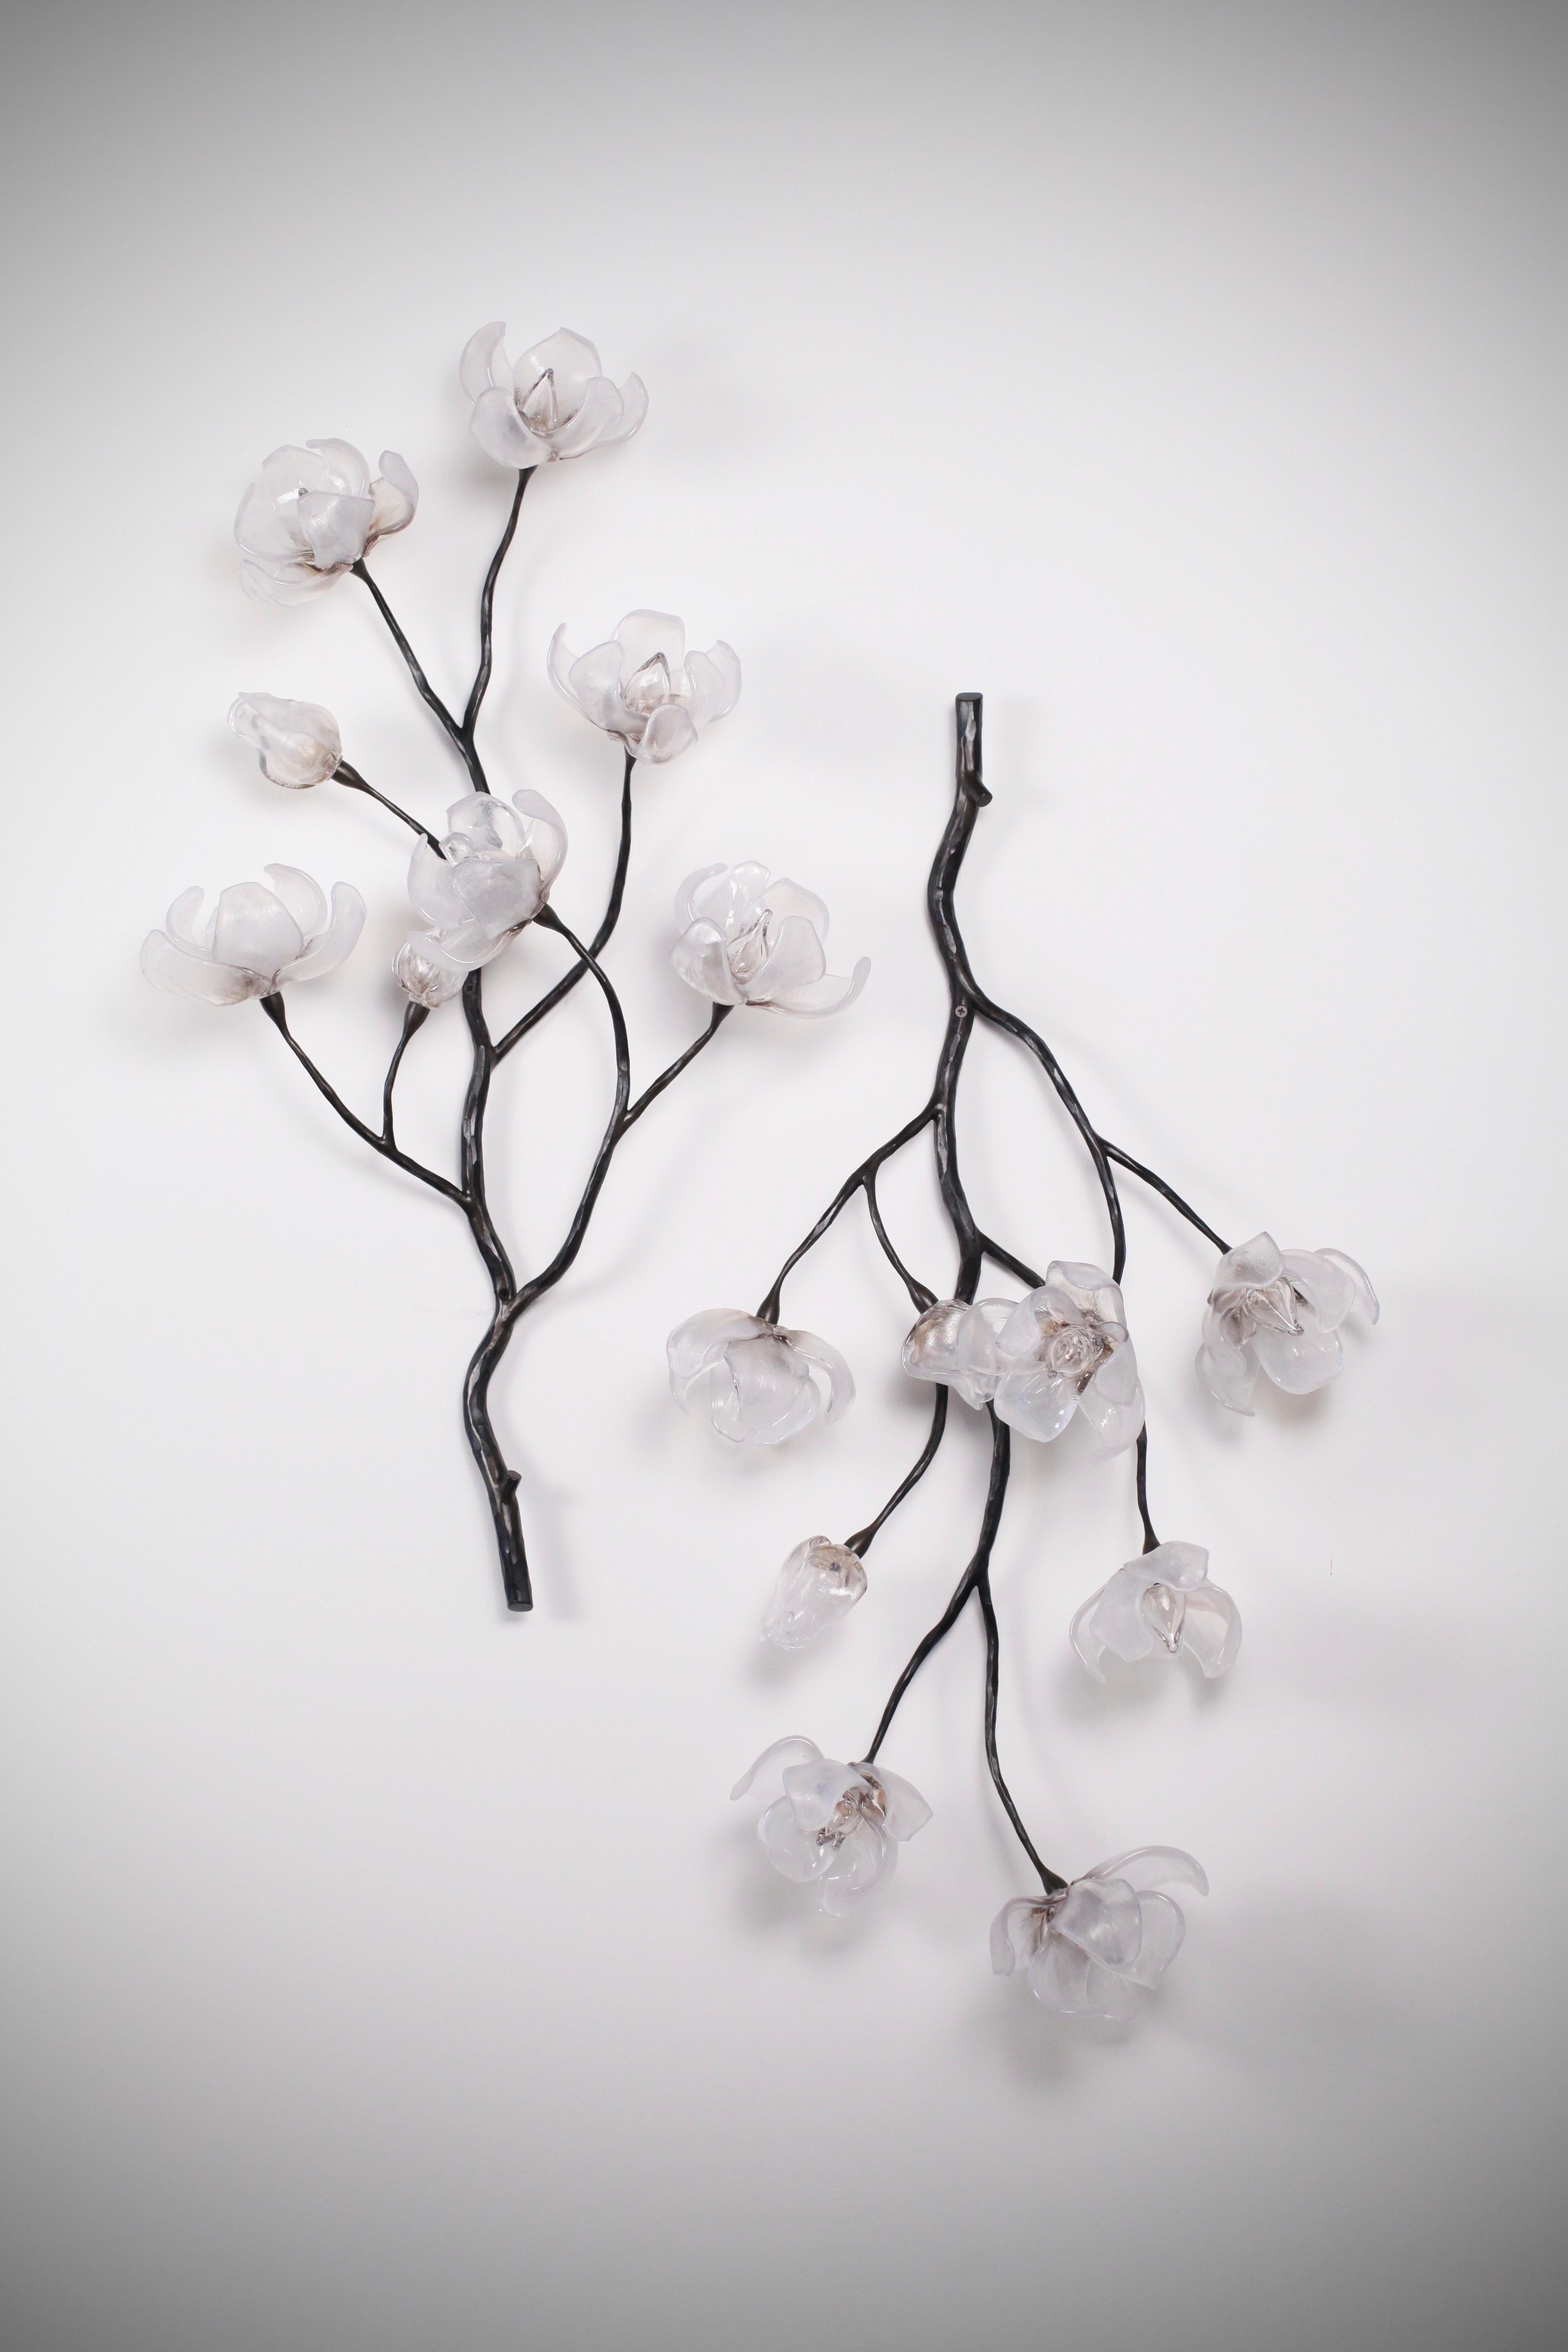 Branching Magnolia Wall Sculpture, designed and created by Elizabeth Lyons. Each one-of-a-kind piece is handmade and can be ordered as one piece or in multiples. with three glass color options available.

Hand-blown and sculpted glass magnolia